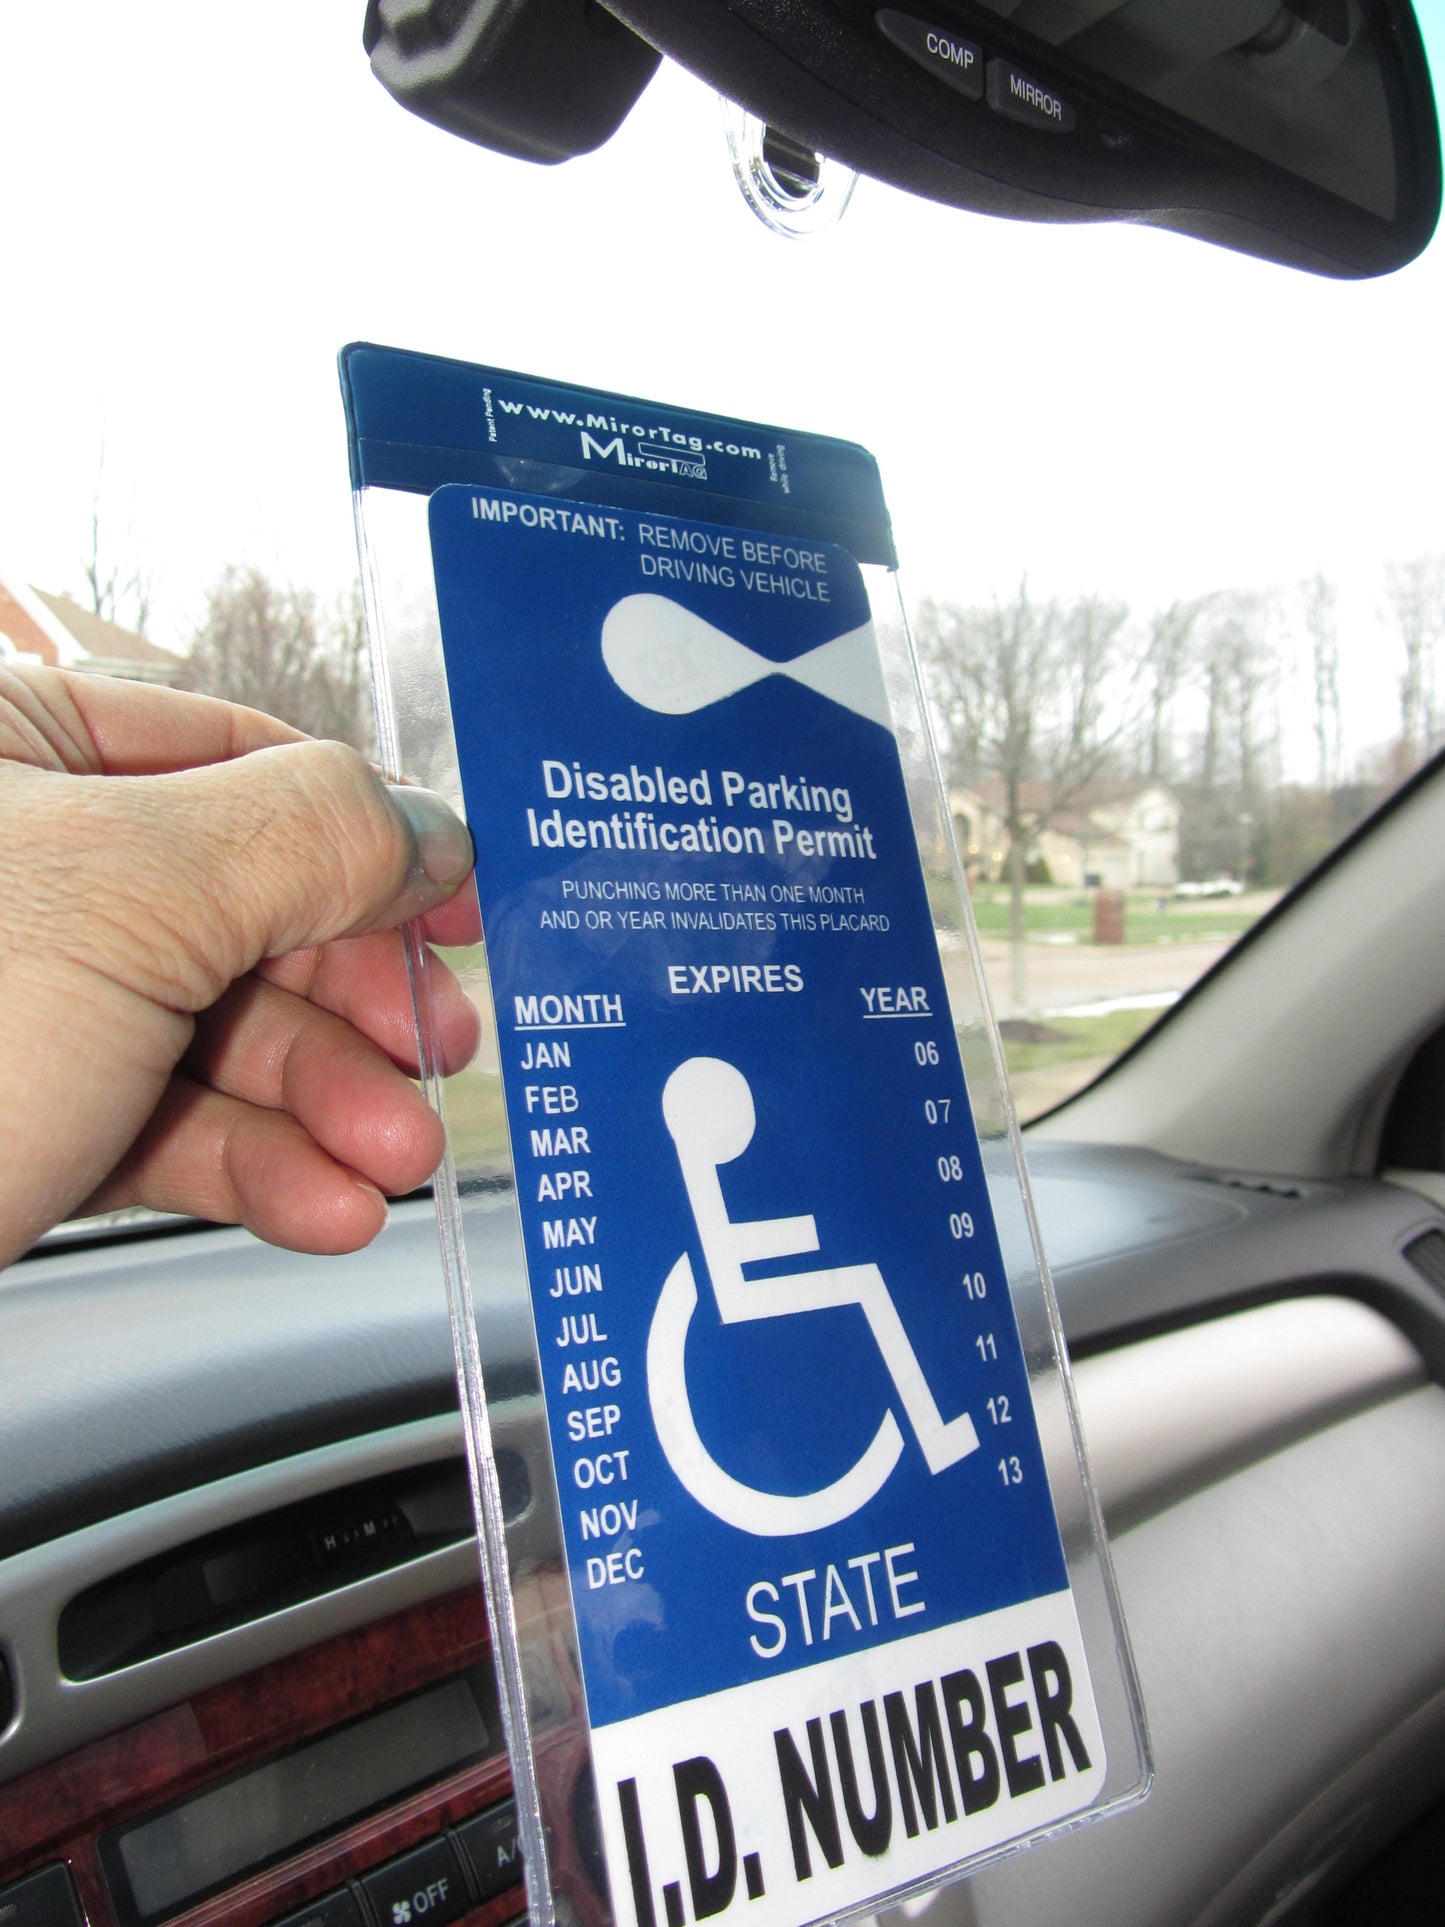 Mirortag Silver™ - Handicap Parking Placard holder & Protector for short tags such as Louisiana & Indiana States. Tag size: 7in x 4in. Easy ON and OFF. Made in USA